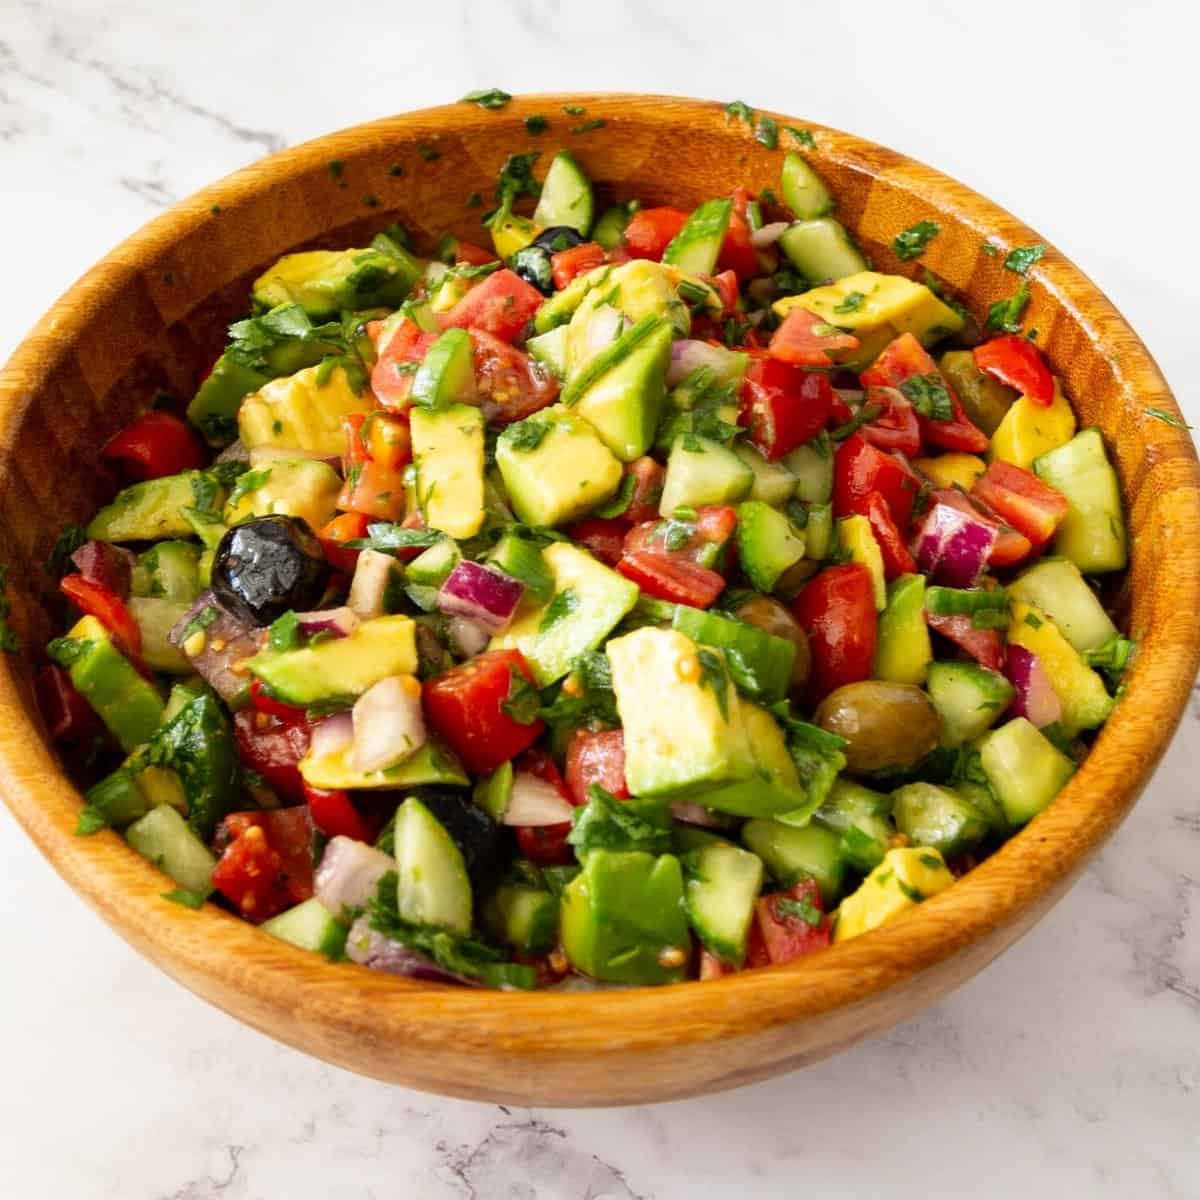 Avocado salad with veggies in a bowl.